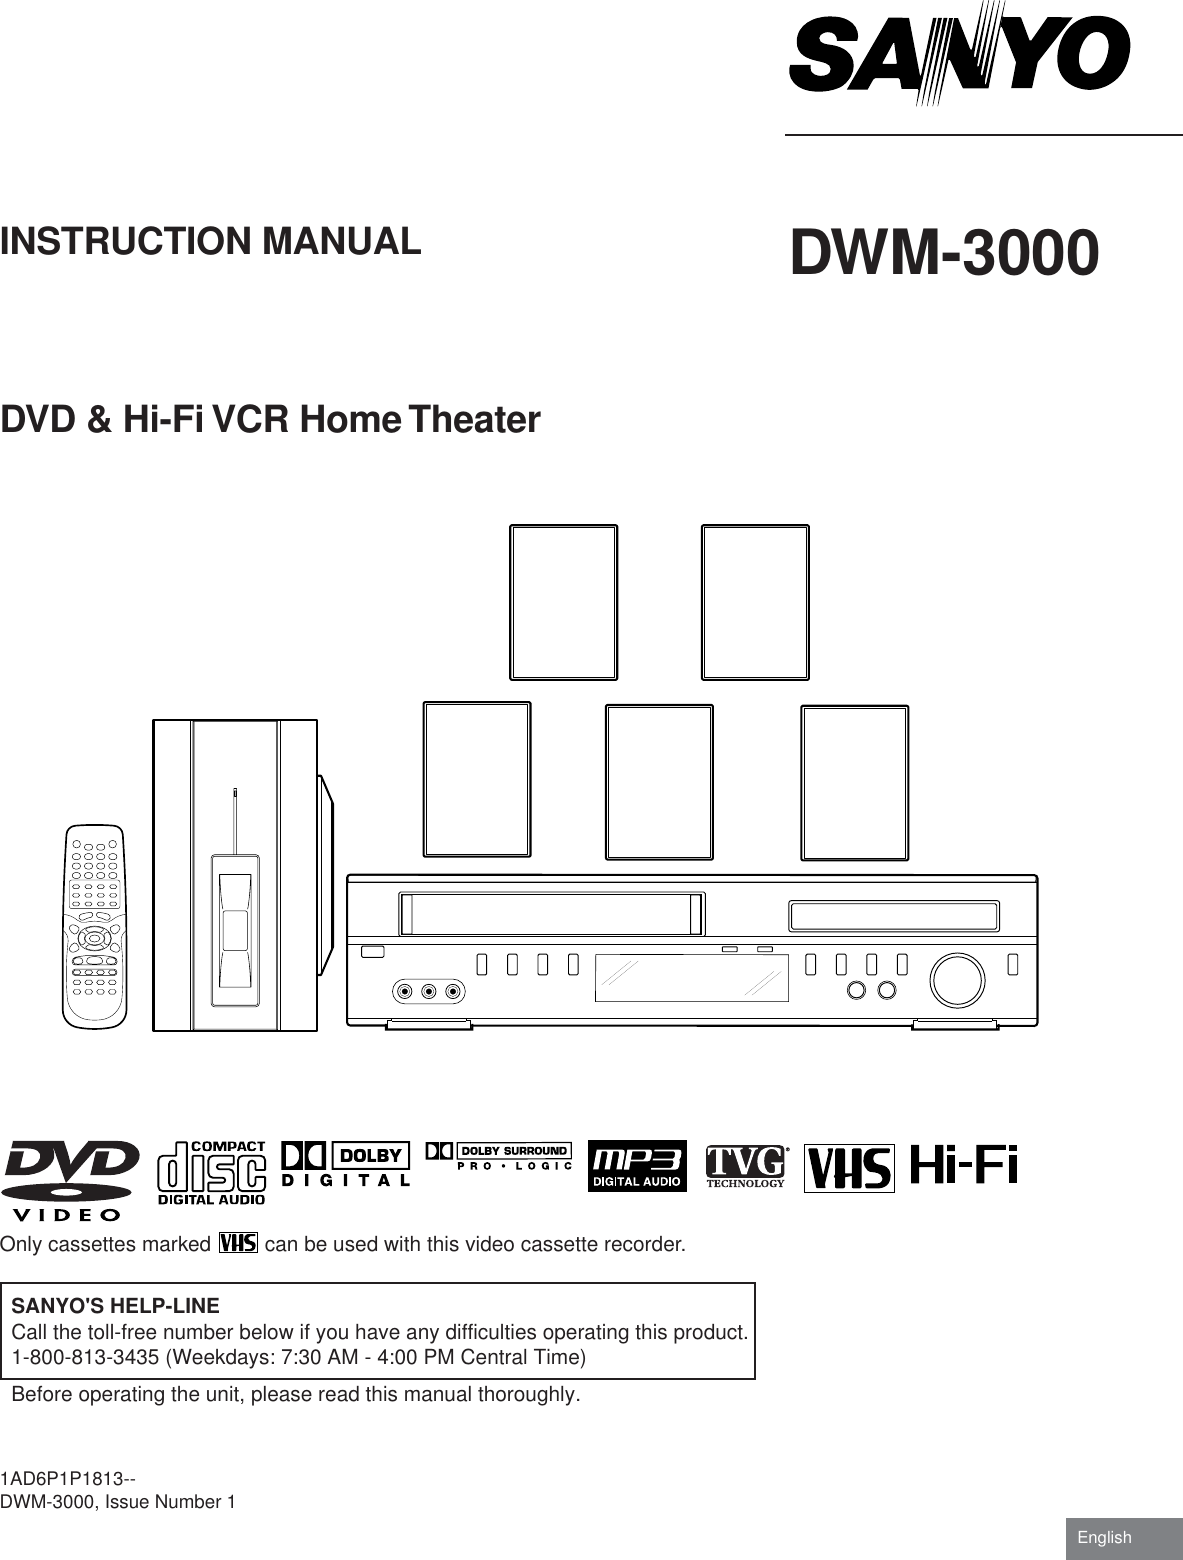 INSTRUCTION MANUALDVD &amp; Hi-Fi VCR Home Theater1AD6P1P1813--DWM-3000, Issue Number 1DWM-3000EnglishSANYO&apos;S HELP-LINECall the toll-free number below if you have any difficulties operating this product.1-800-813-3435 (Weekdays: 7:30 AM - 4:00 PM Central Time)Before operating the unit, please read this manual thoroughly.Only cassettes marked   can be used with this video cassette recorder.